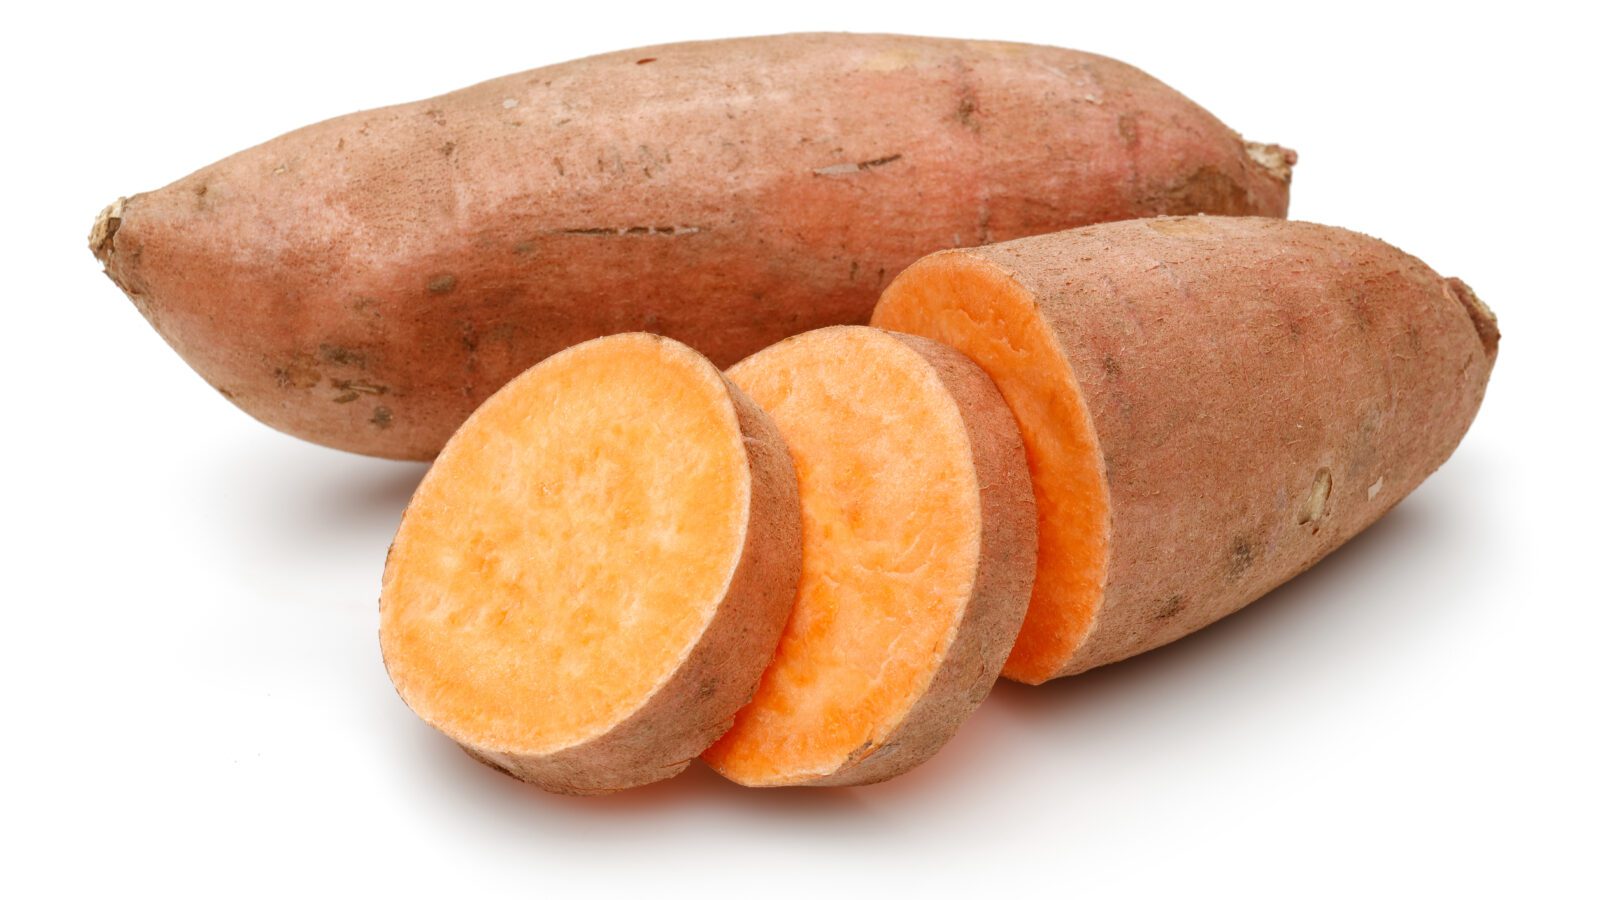 Sweet,Potato,With,Slices,Isolated,On,White,Background